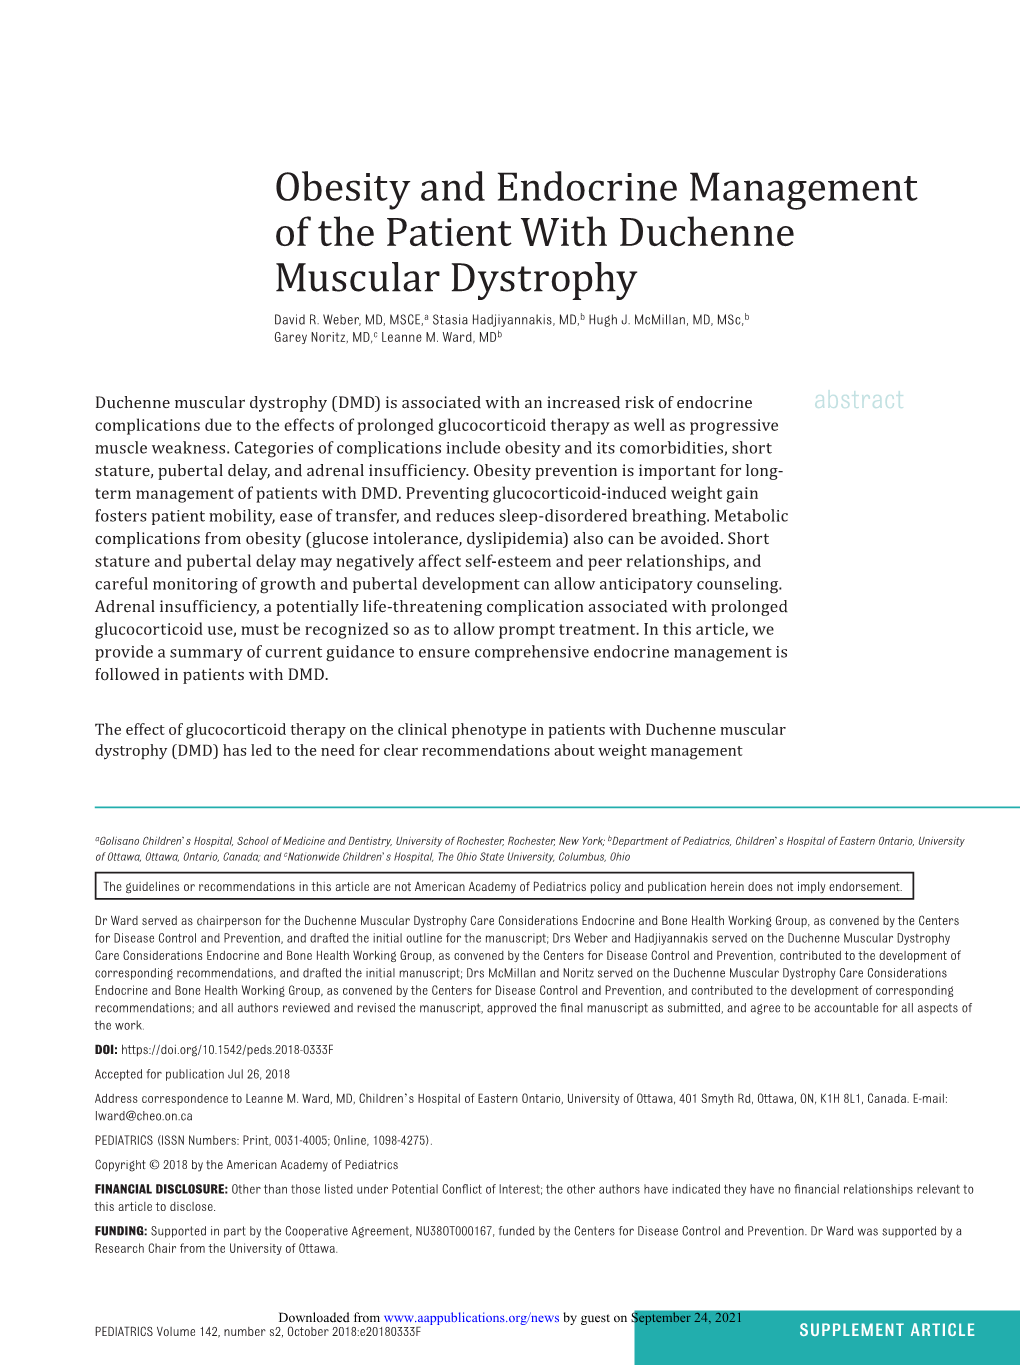 Obesity and Endocrine Management of the Patient with Duchenne Muscular Dystrophy David R